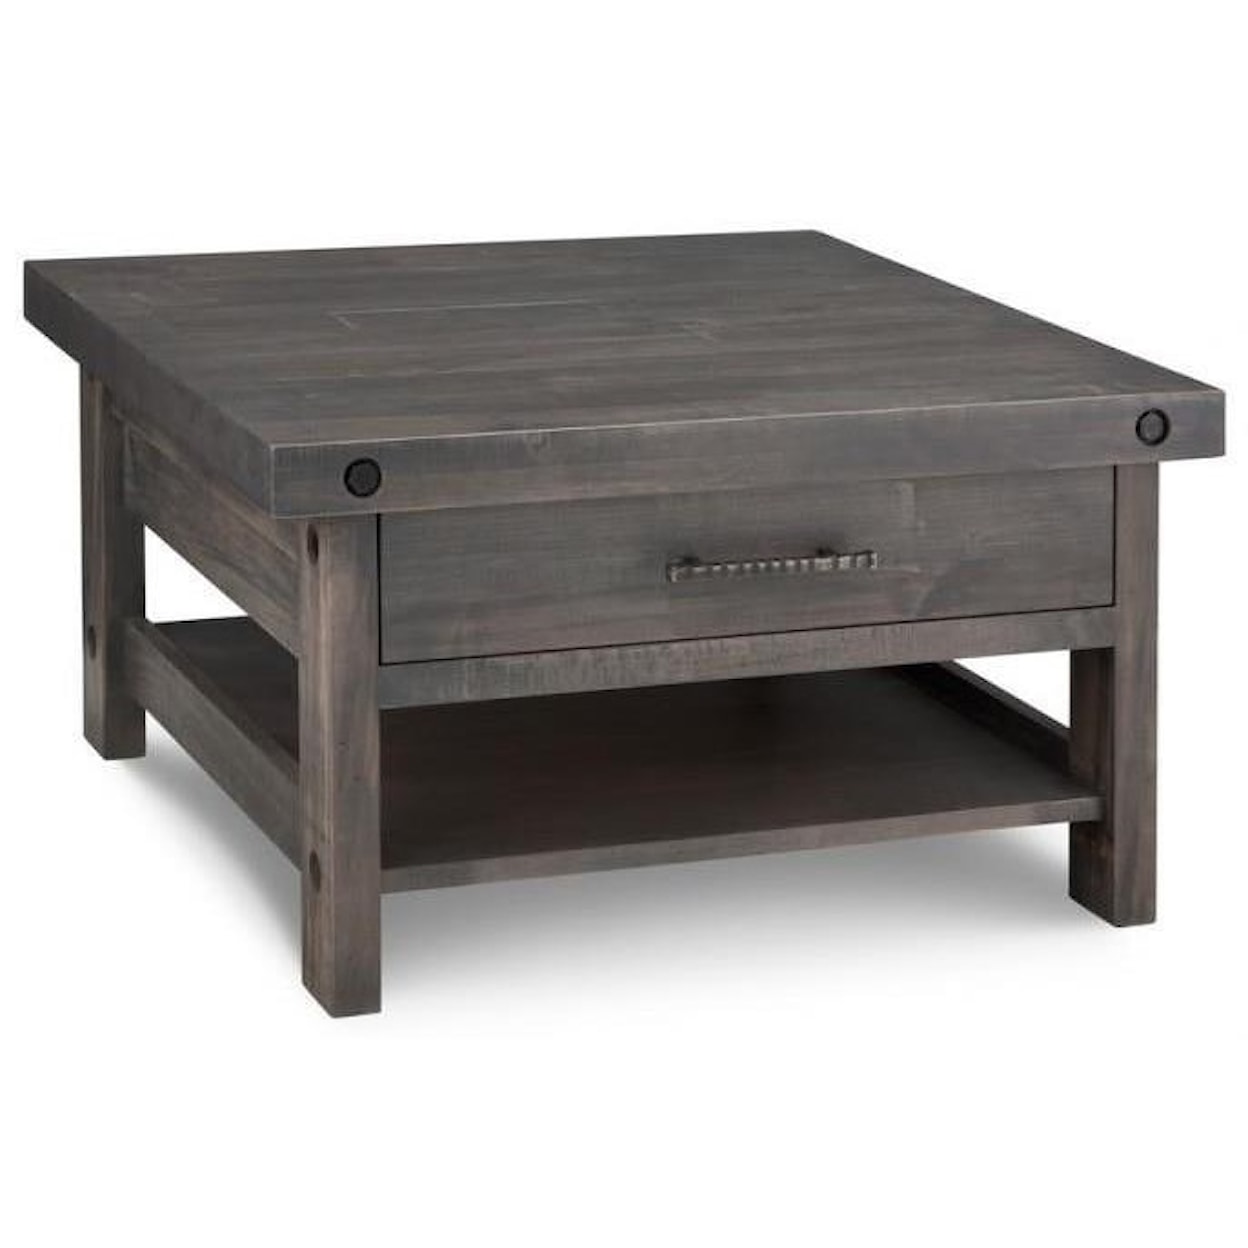 Handstone Rafters Coffee Table